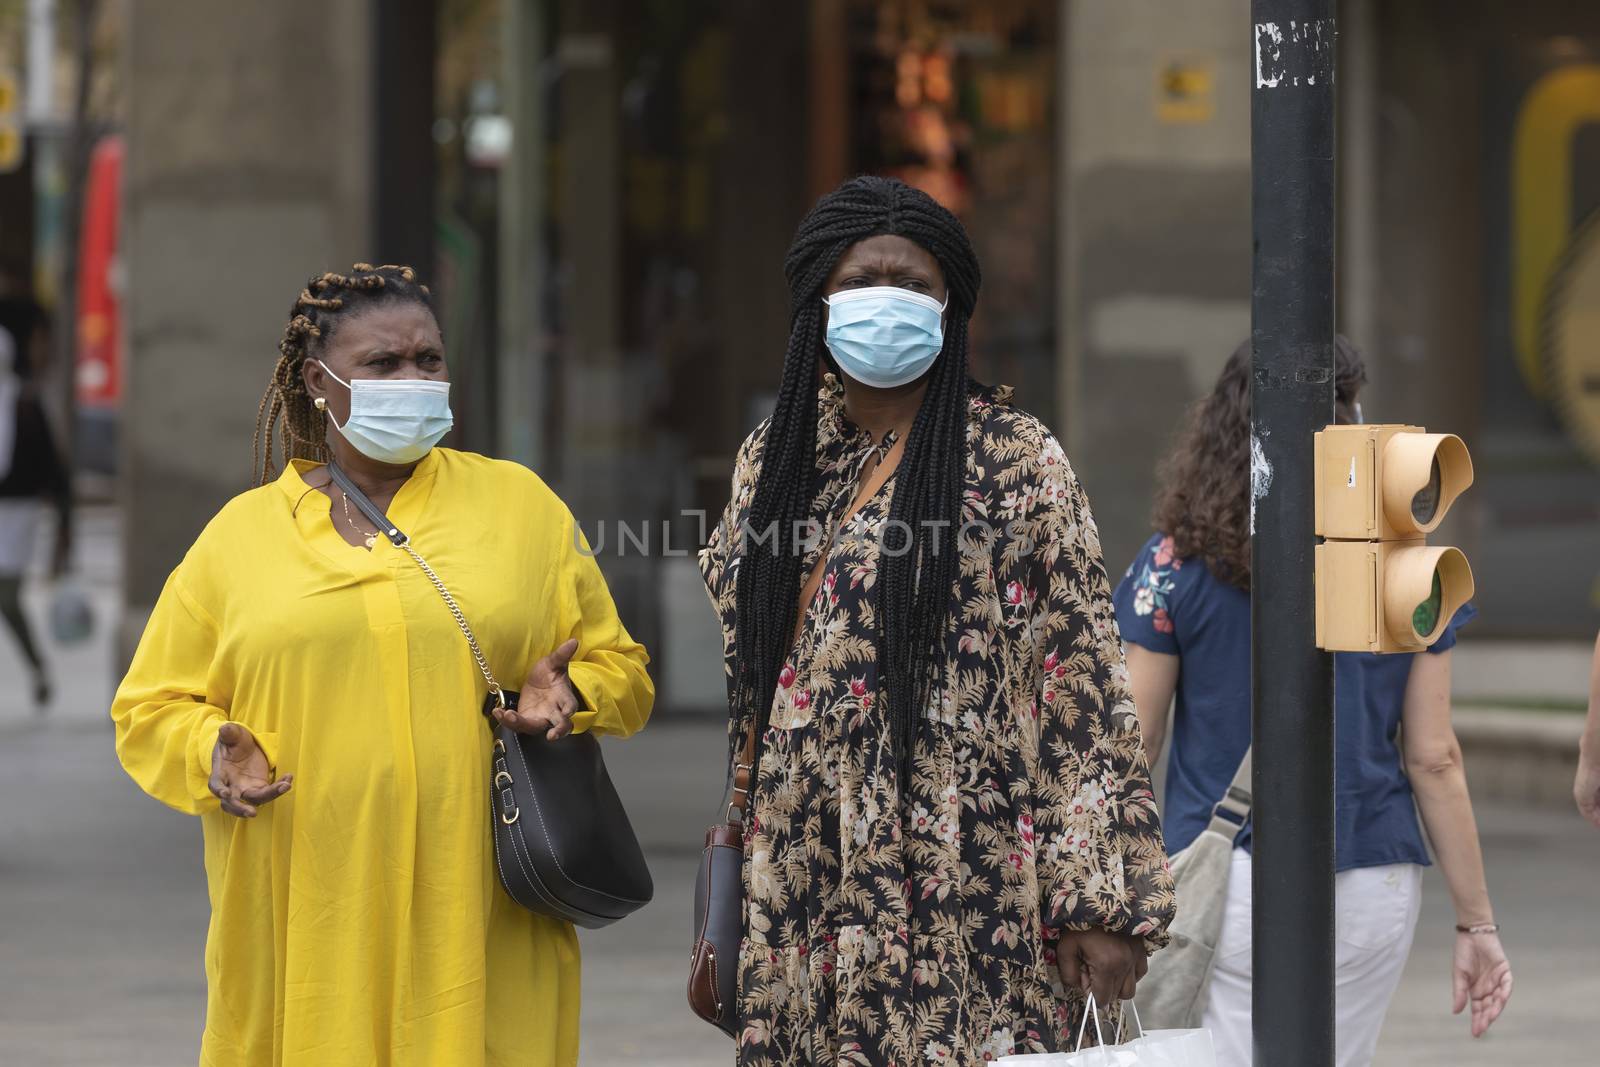 Zaragoza, Spain - August 18, 2020: Couple of black inmigrant women talking with face masks, due to the coronavirus pandemic, in the central area of Zaragoza.